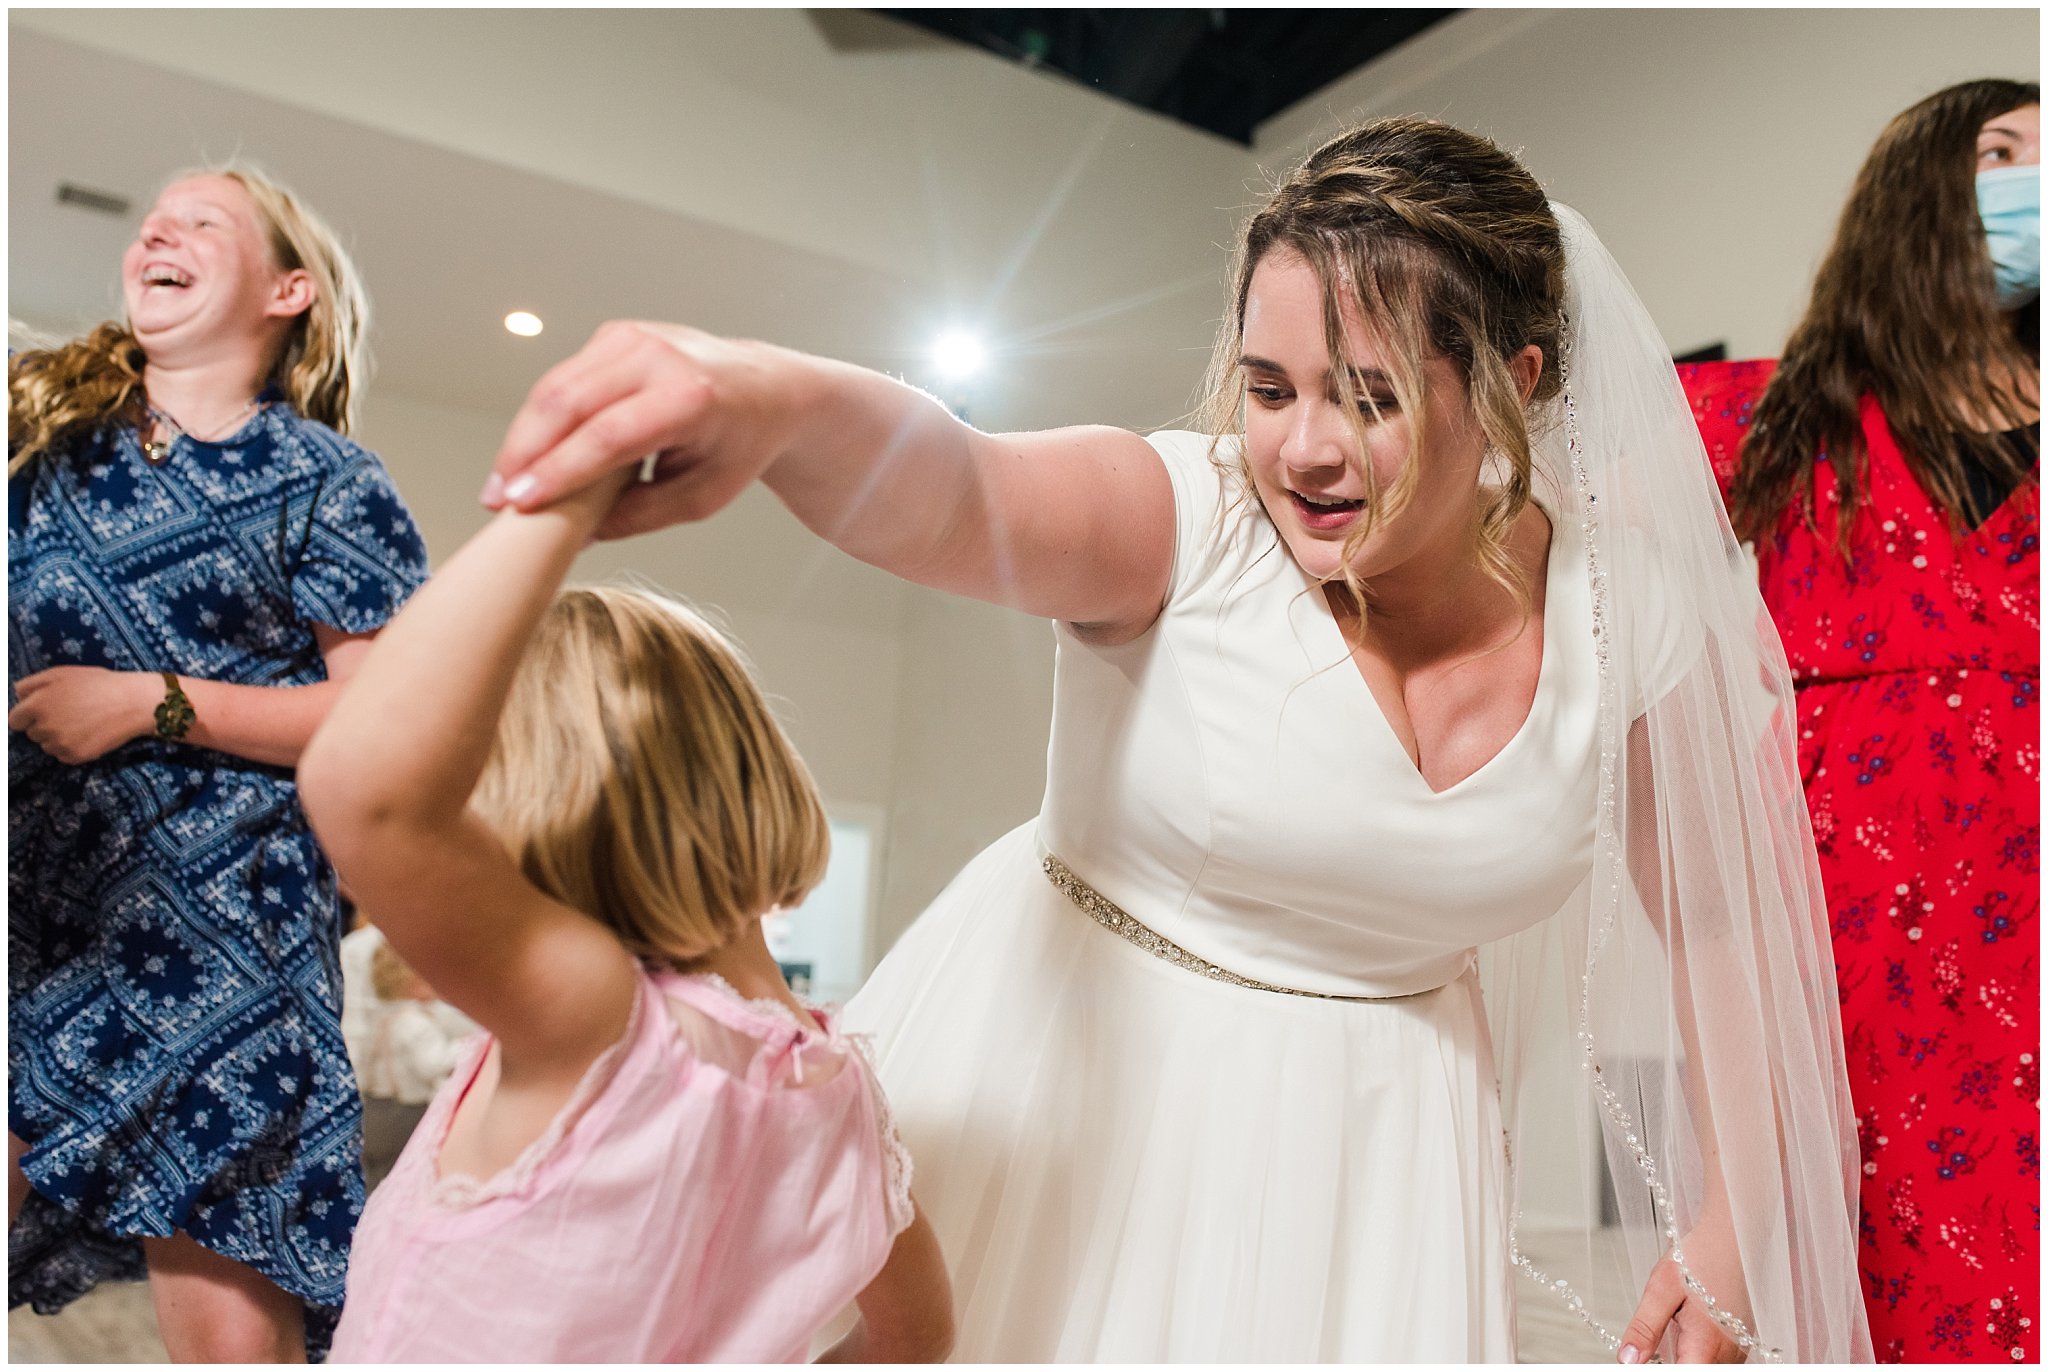 Party dancing during wedding | Talia Event Center Summer Wedding | Jessie and Dallin Photography